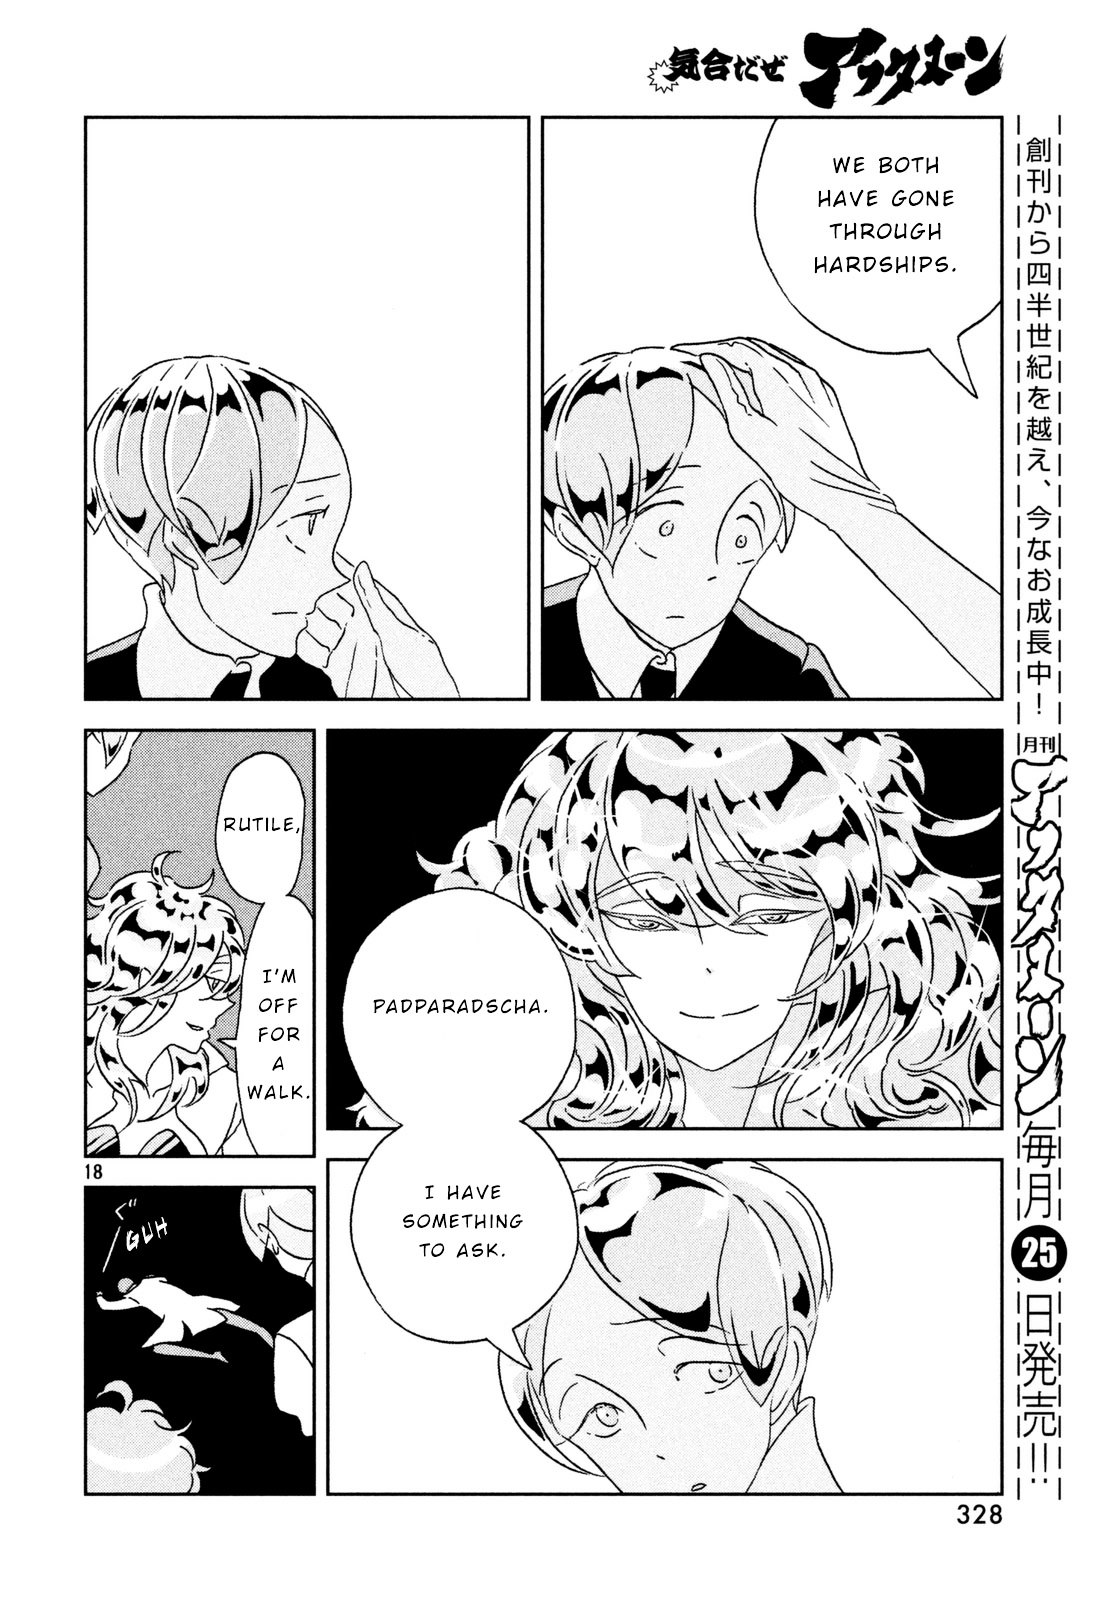 Land of the Lustrous, Chapter 29 image 18